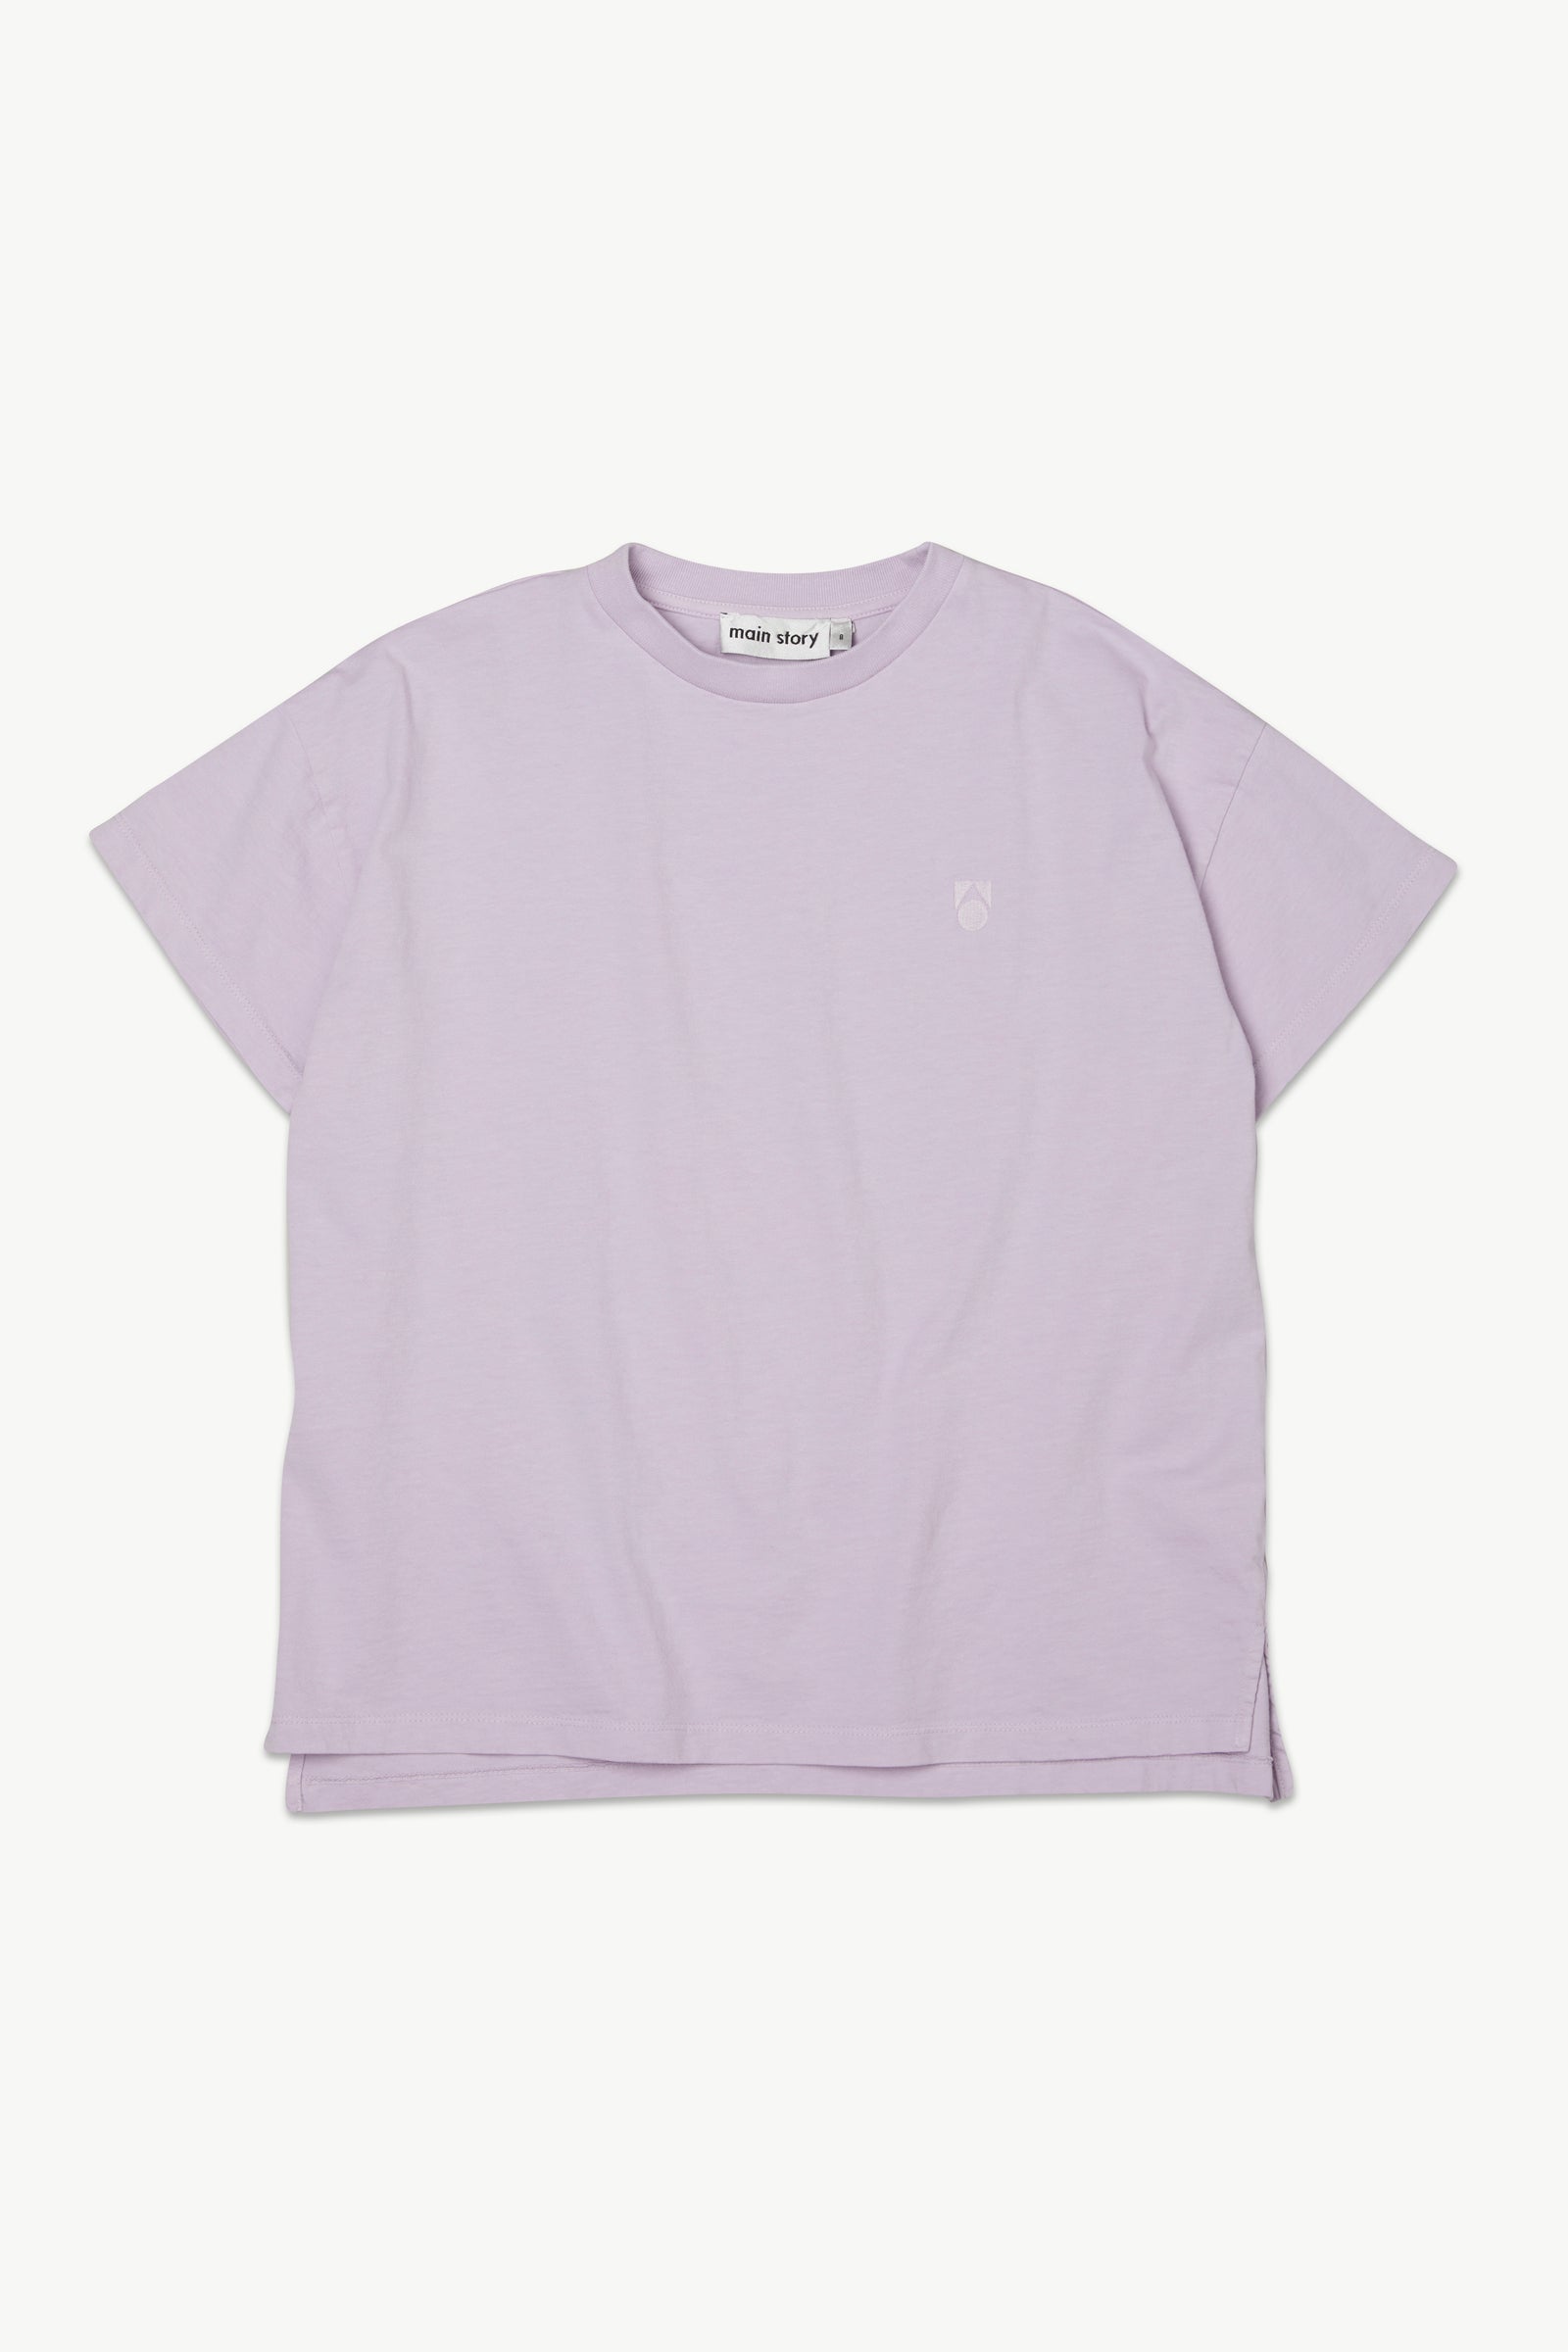 Main Story - oversized tee - lavender frost jersey